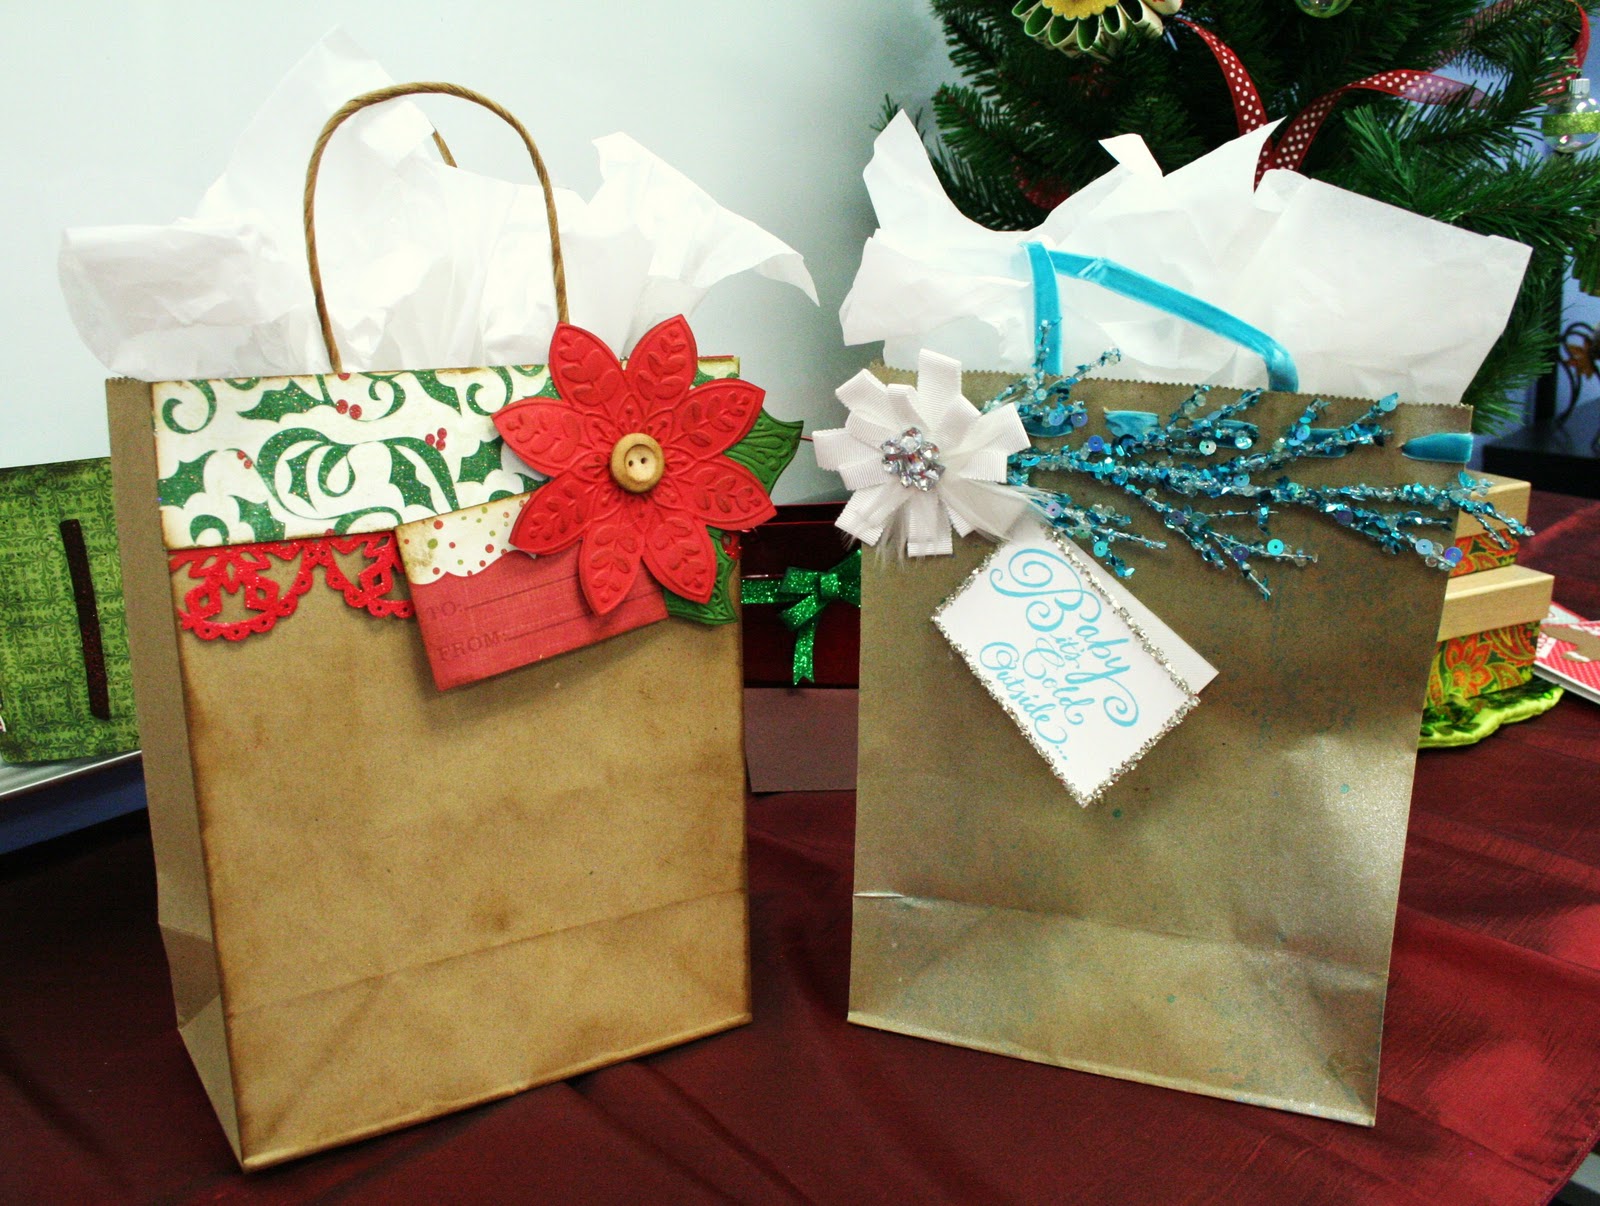 Oh My Crafts Blog: Day 1 - Do It Yourself Christmas Gift Bags